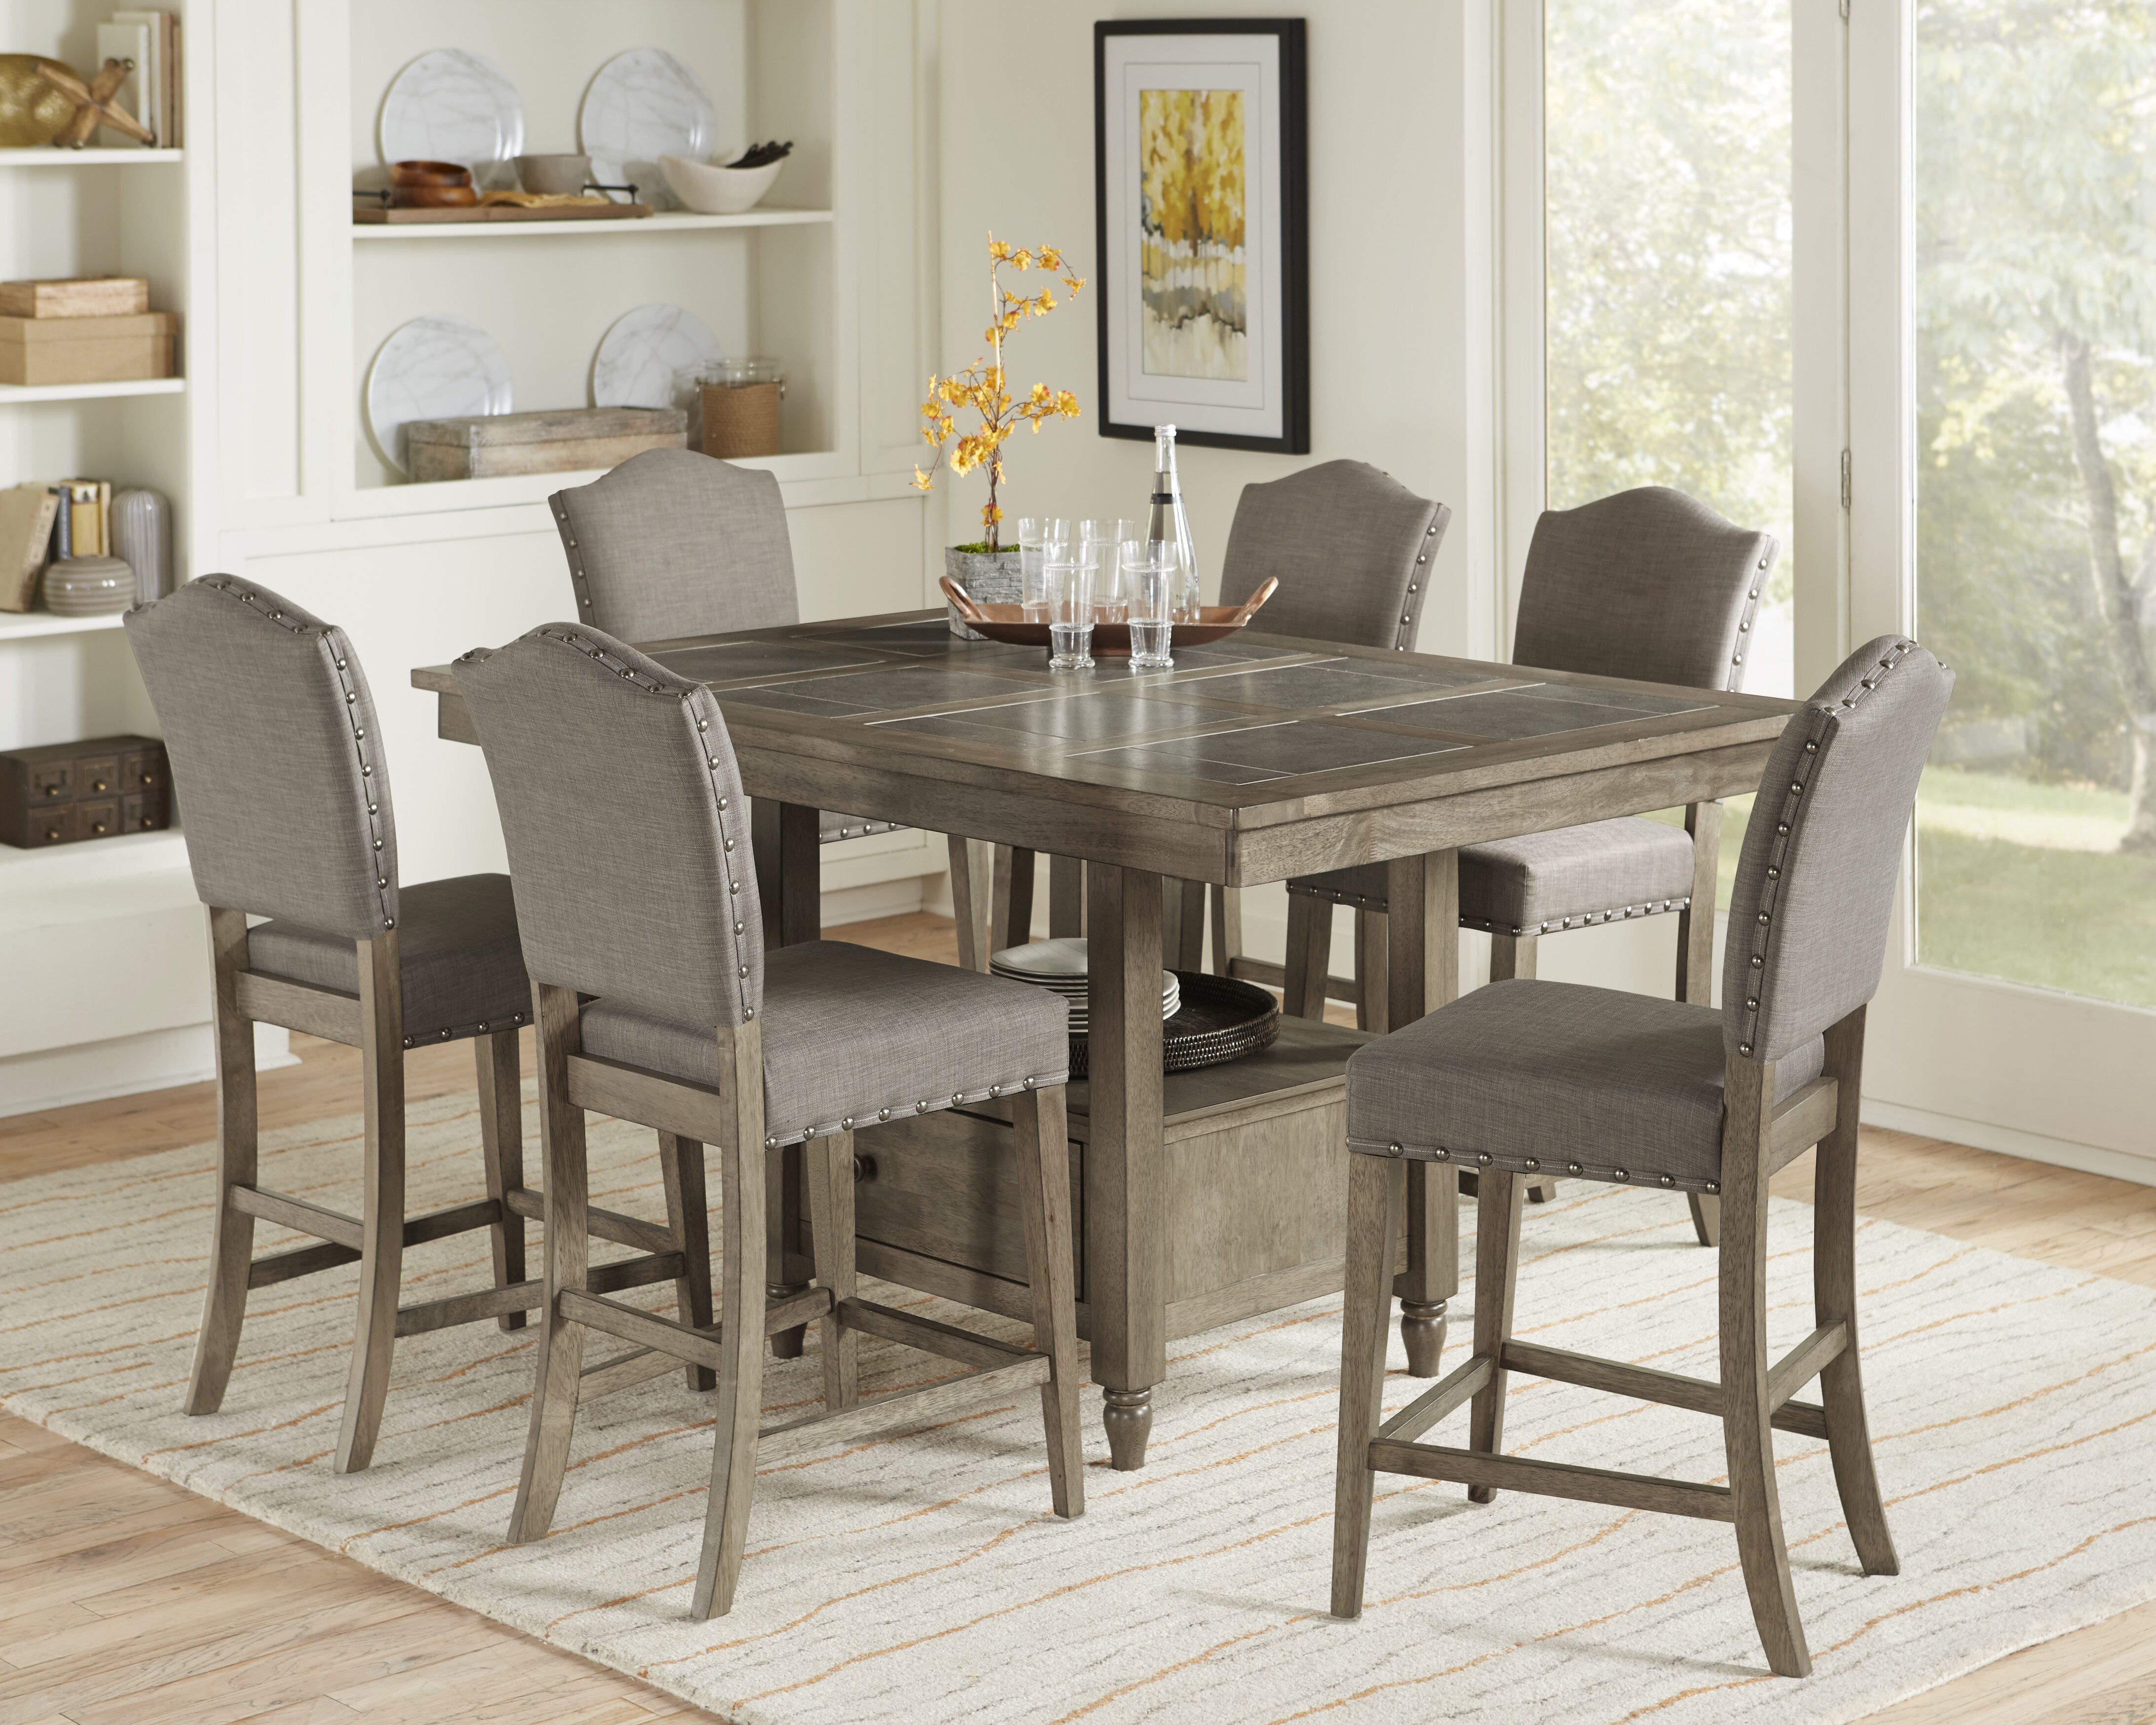 Carley 7 Piece Pub Table Set For Latest Laconia 7 Pieces Solid Wood Dining Sets (Set Of 7) (View 5 of 20)